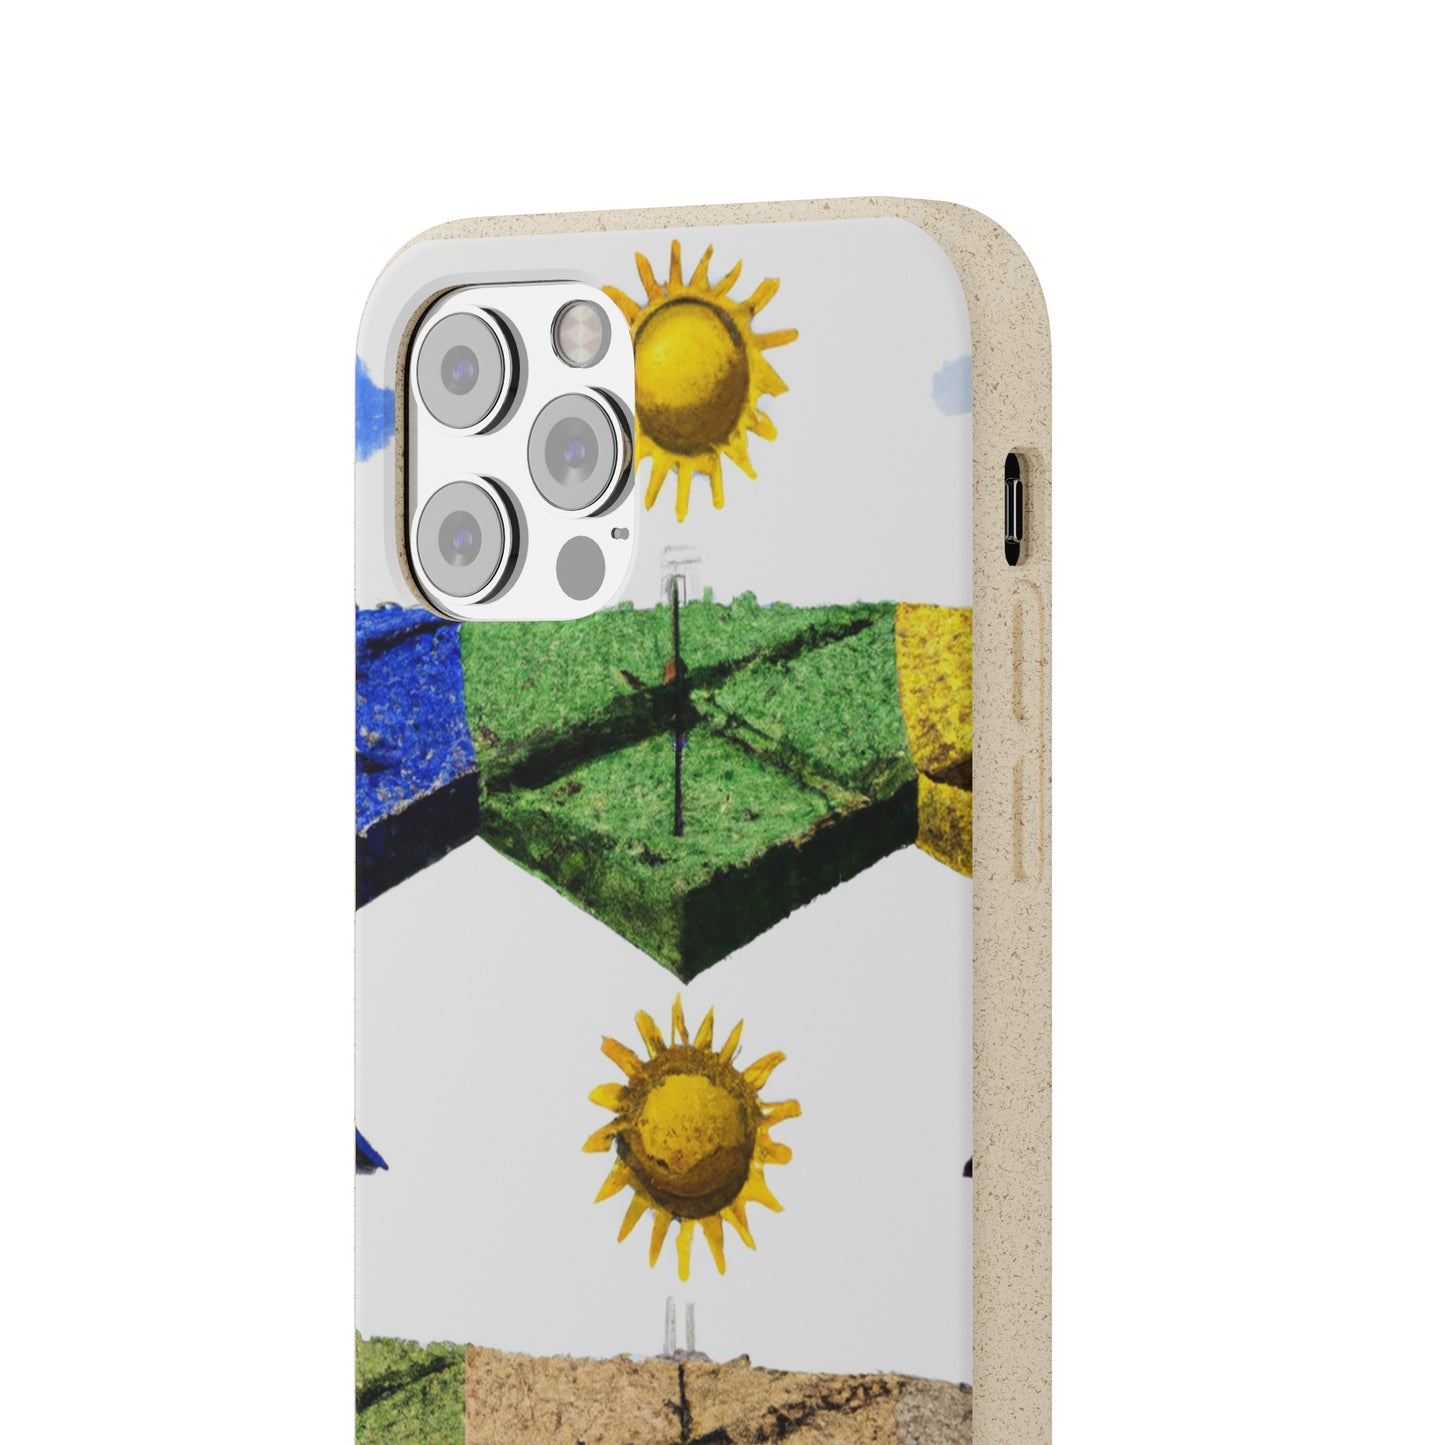 "Nature in Harmony: An Interplay of Elements in the Landscape" - Bam Boo! Lifestyle Eco-friendly Cases